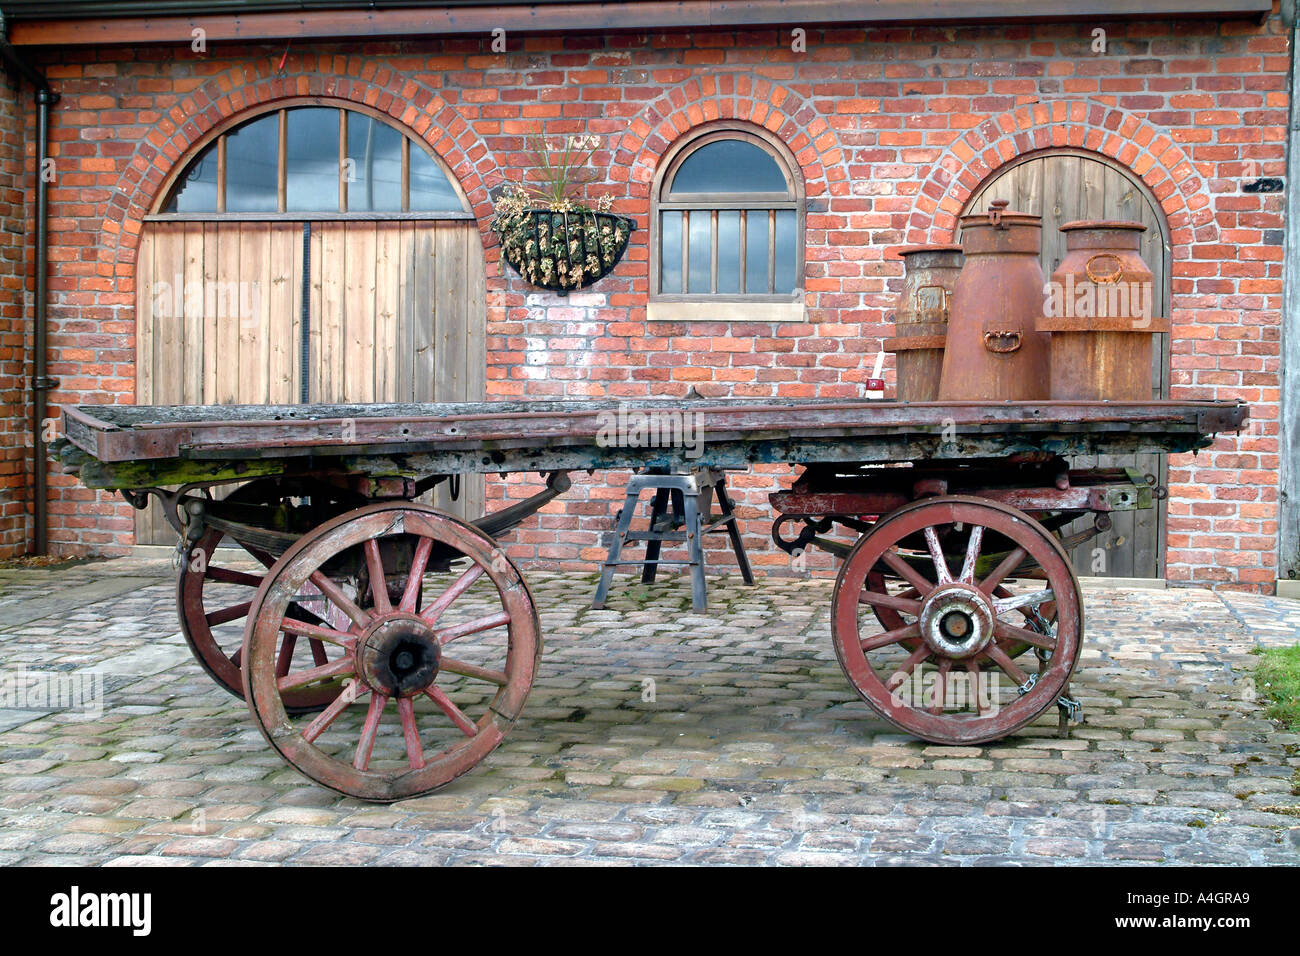 An old wagon outside the Bredbury Hotel (formerly the Bradburie Hall) near Manchester in England. Stock Photo